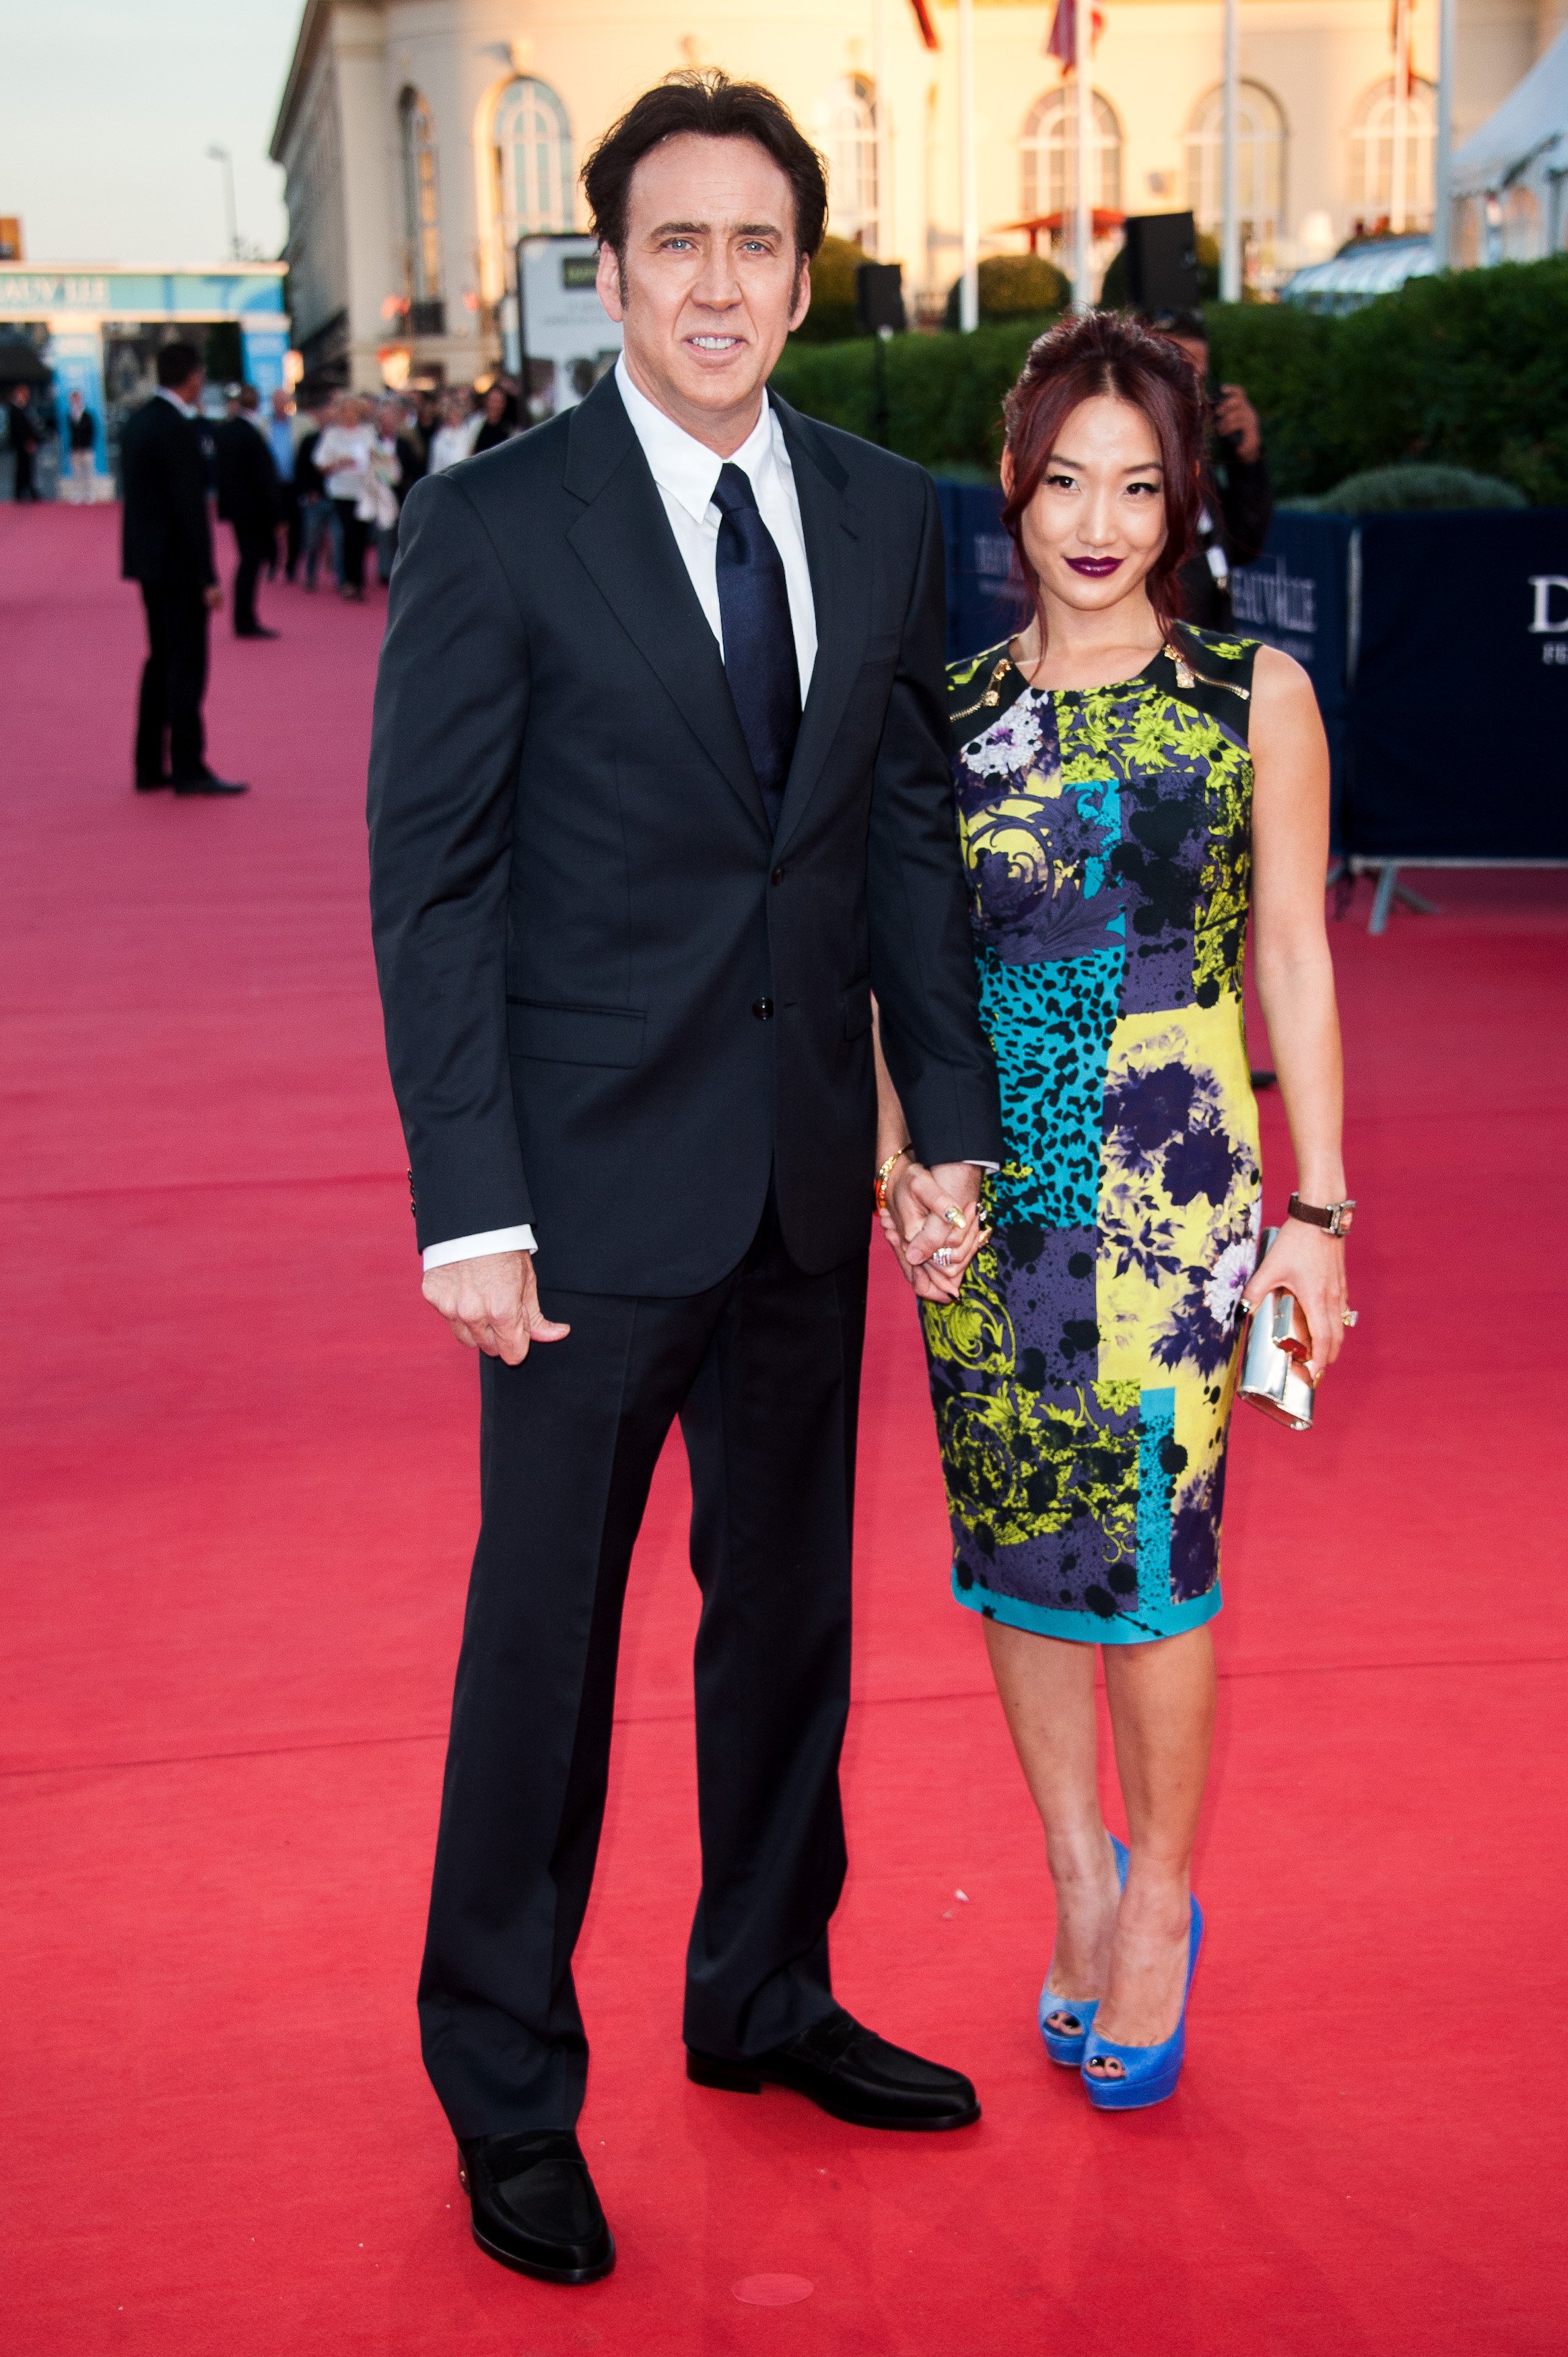 Nicolas Cage and his wife Alice Kim arriving at the premiere of "Joe" during the 39th Deauville American film festival on September 2, 2013 in Deauville, France. / Source: Getty Images